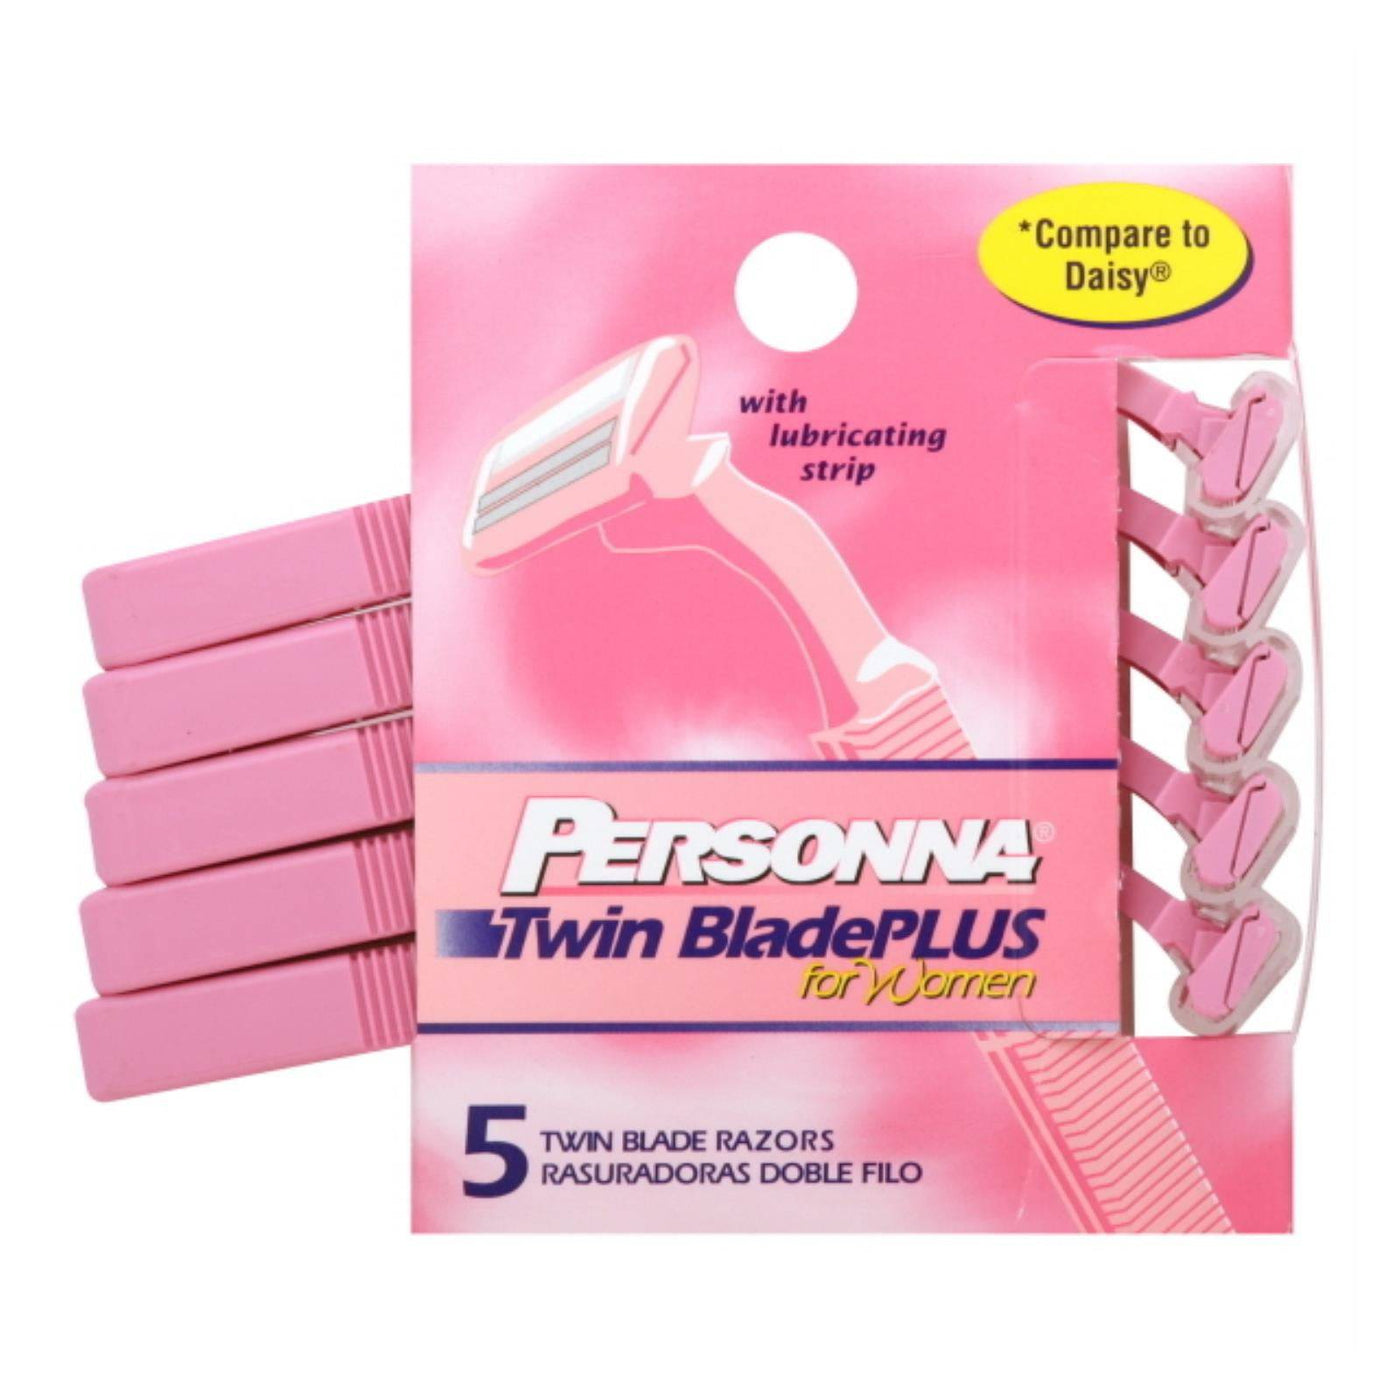 Buy Personna Razor Blades - Twin Blade Plus - 5 Pack  at OnlyNaturals.us